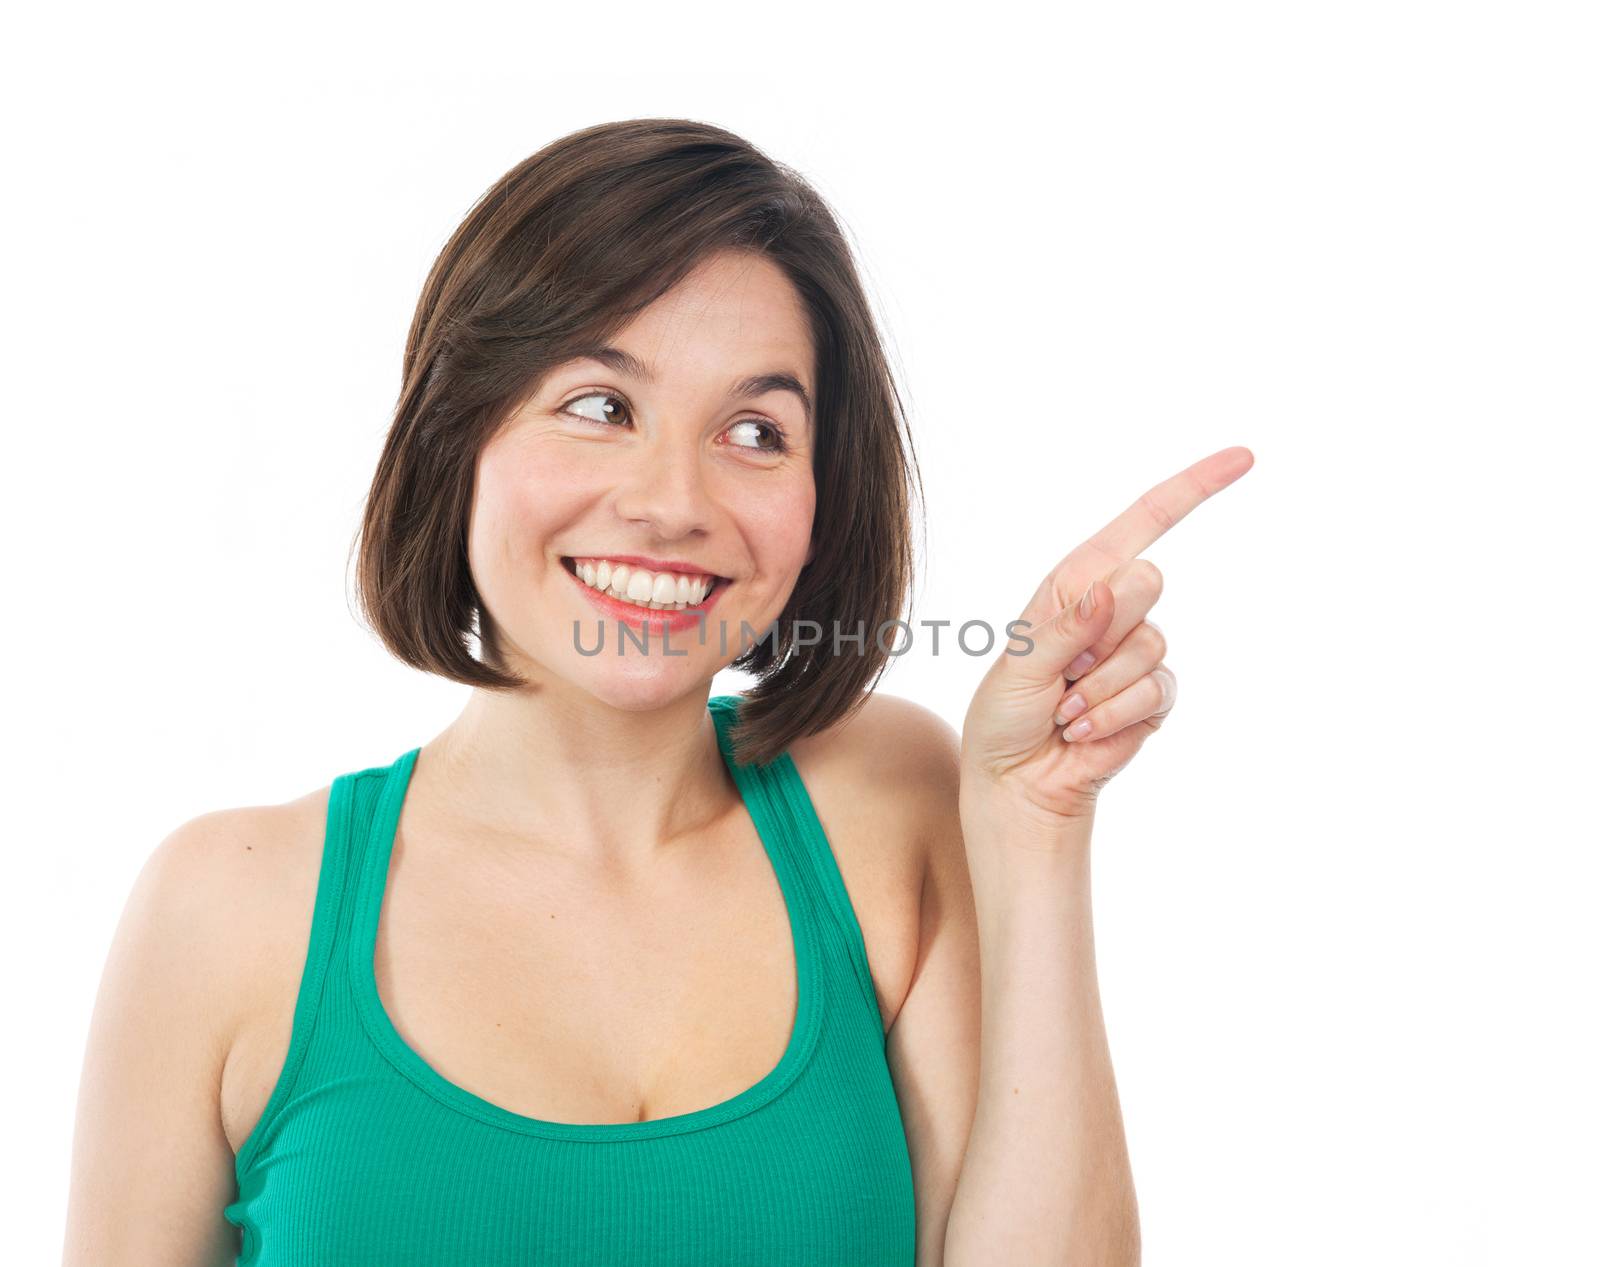 Smiling woman showing something with her finger, isolated on white 